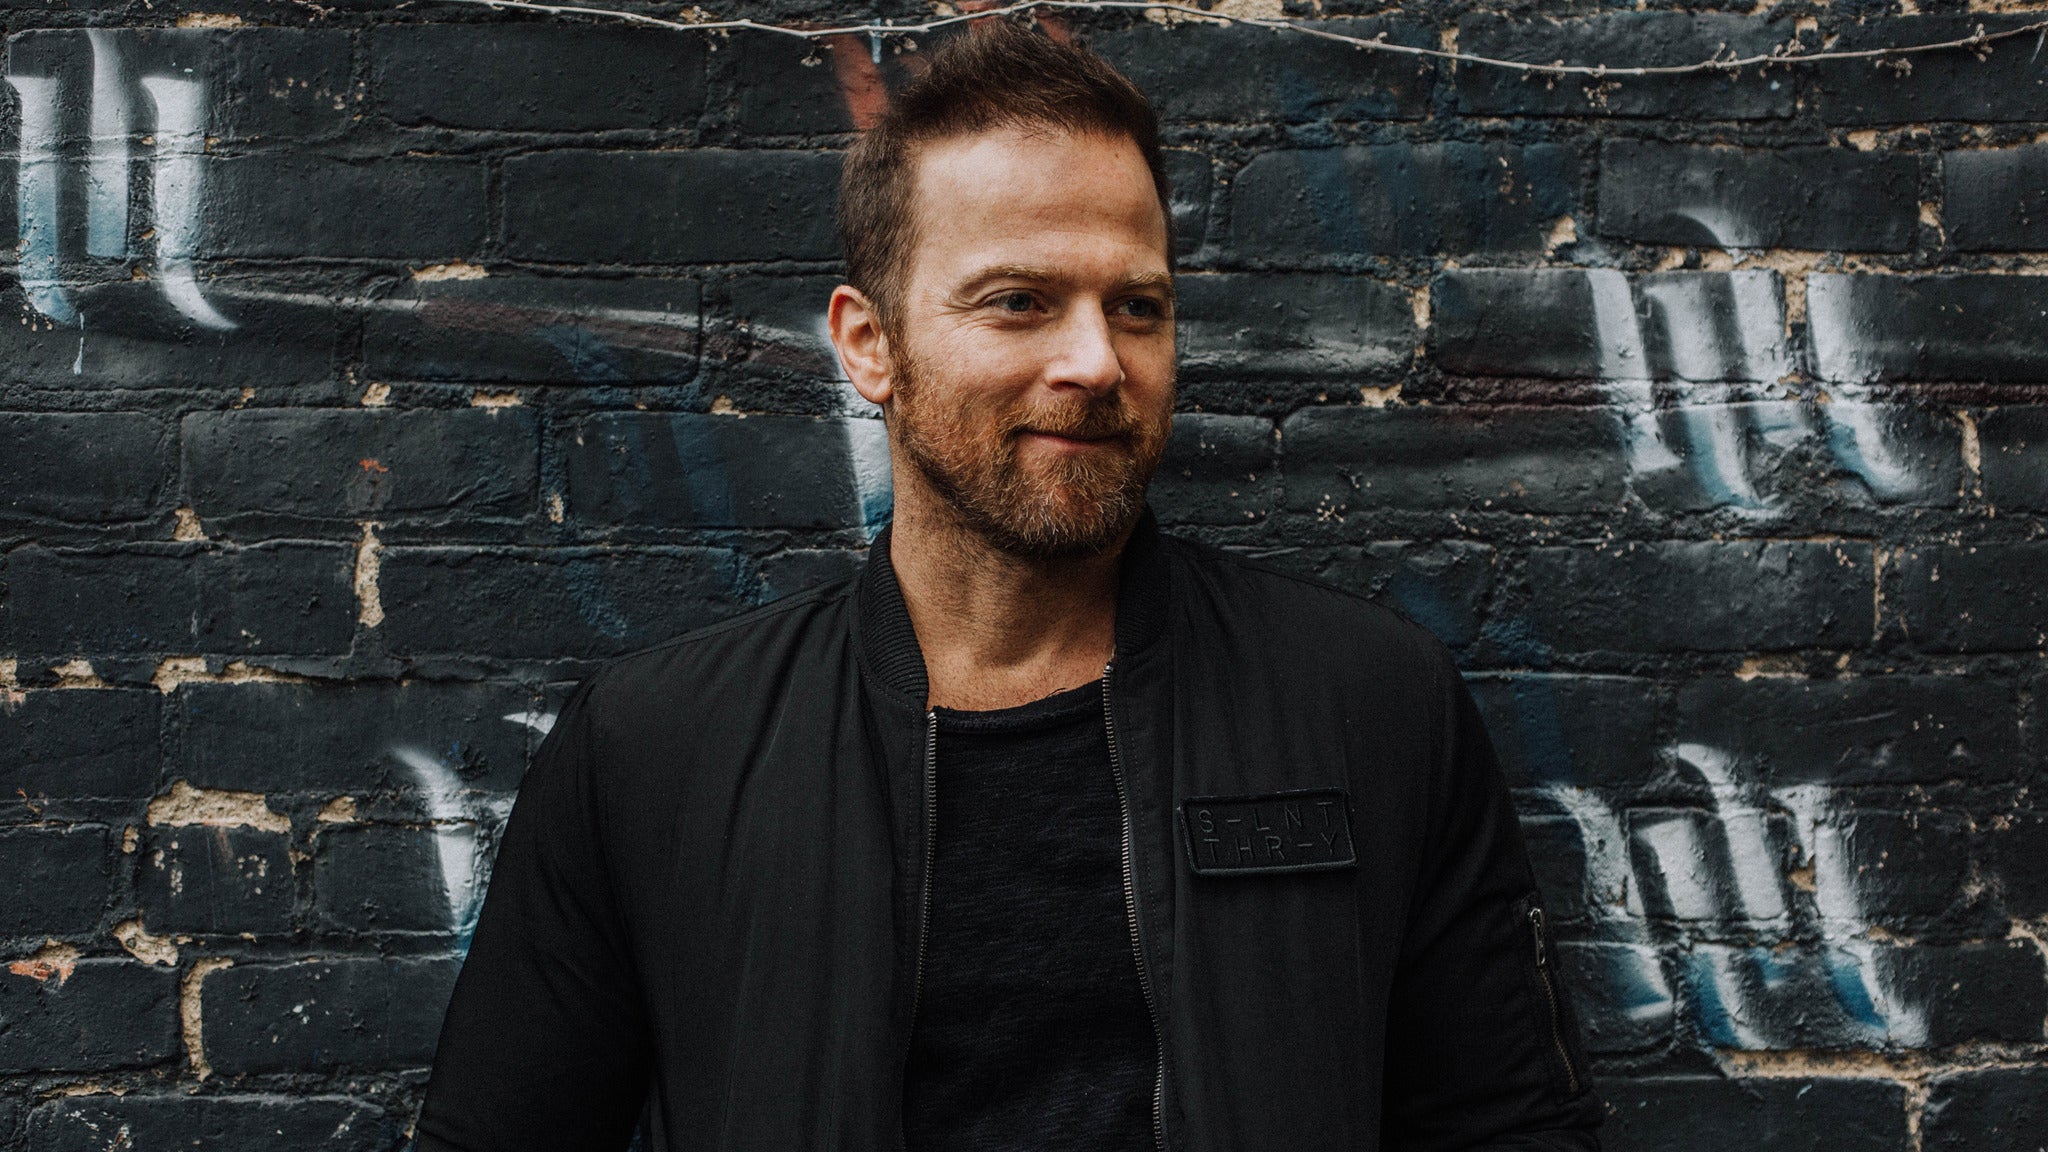 Kip Moore Fire On Wheels Tour September 08, 2022 at The Complex in